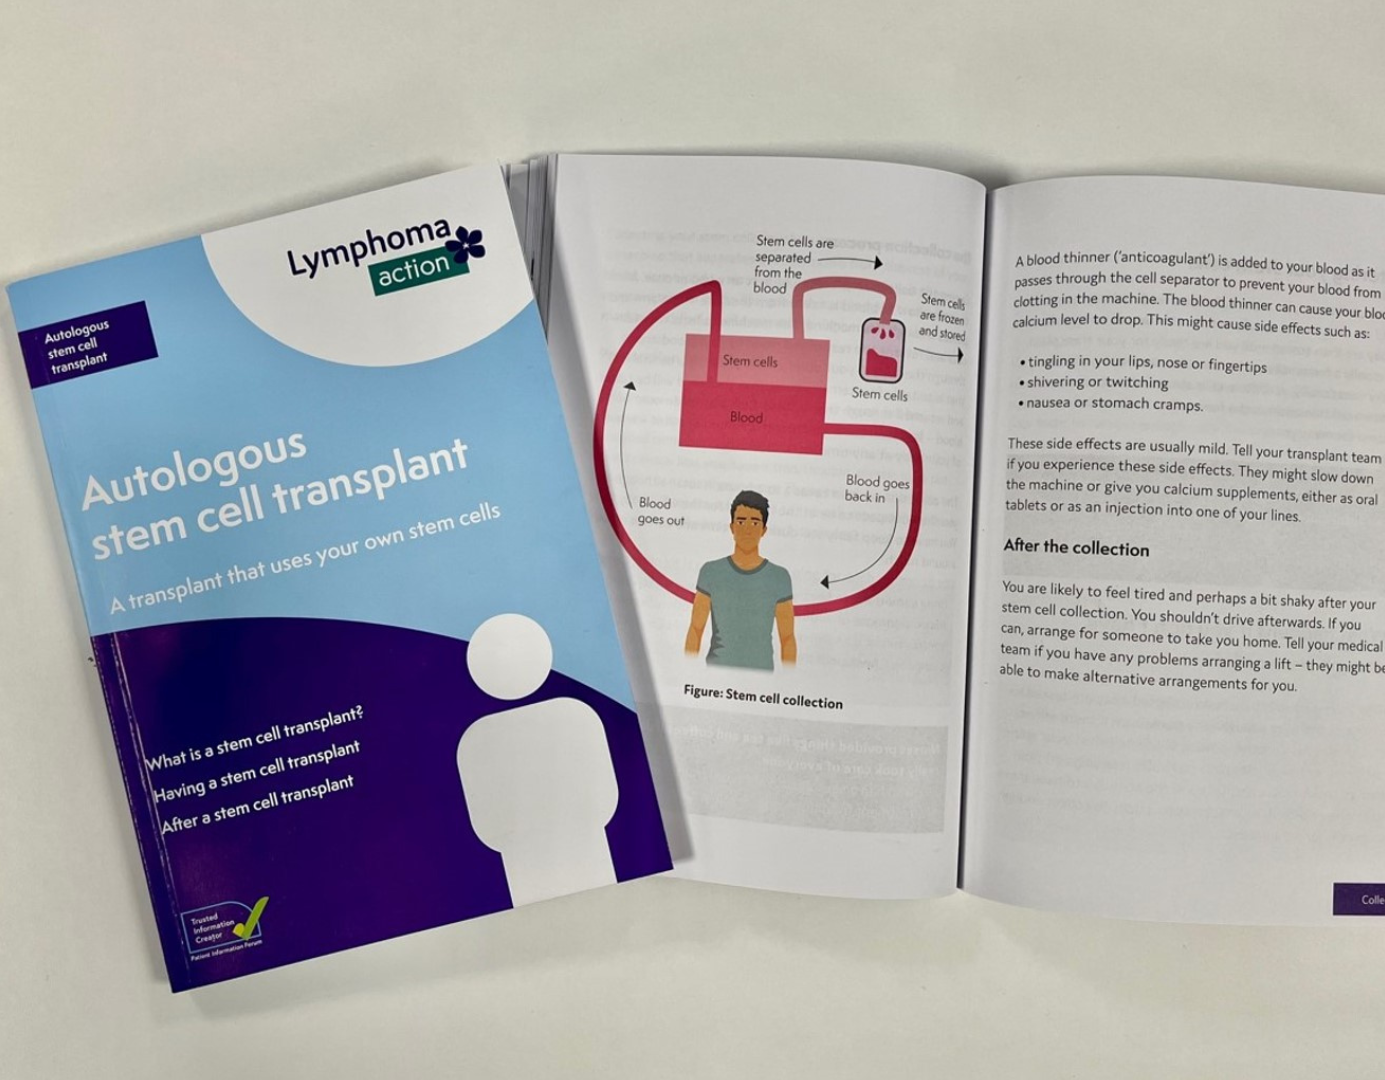 Two Autologous stem cell transplant books - one open on a page with a diagram explaining the process of stem cell collection, and the other book is showing the light blue front cover